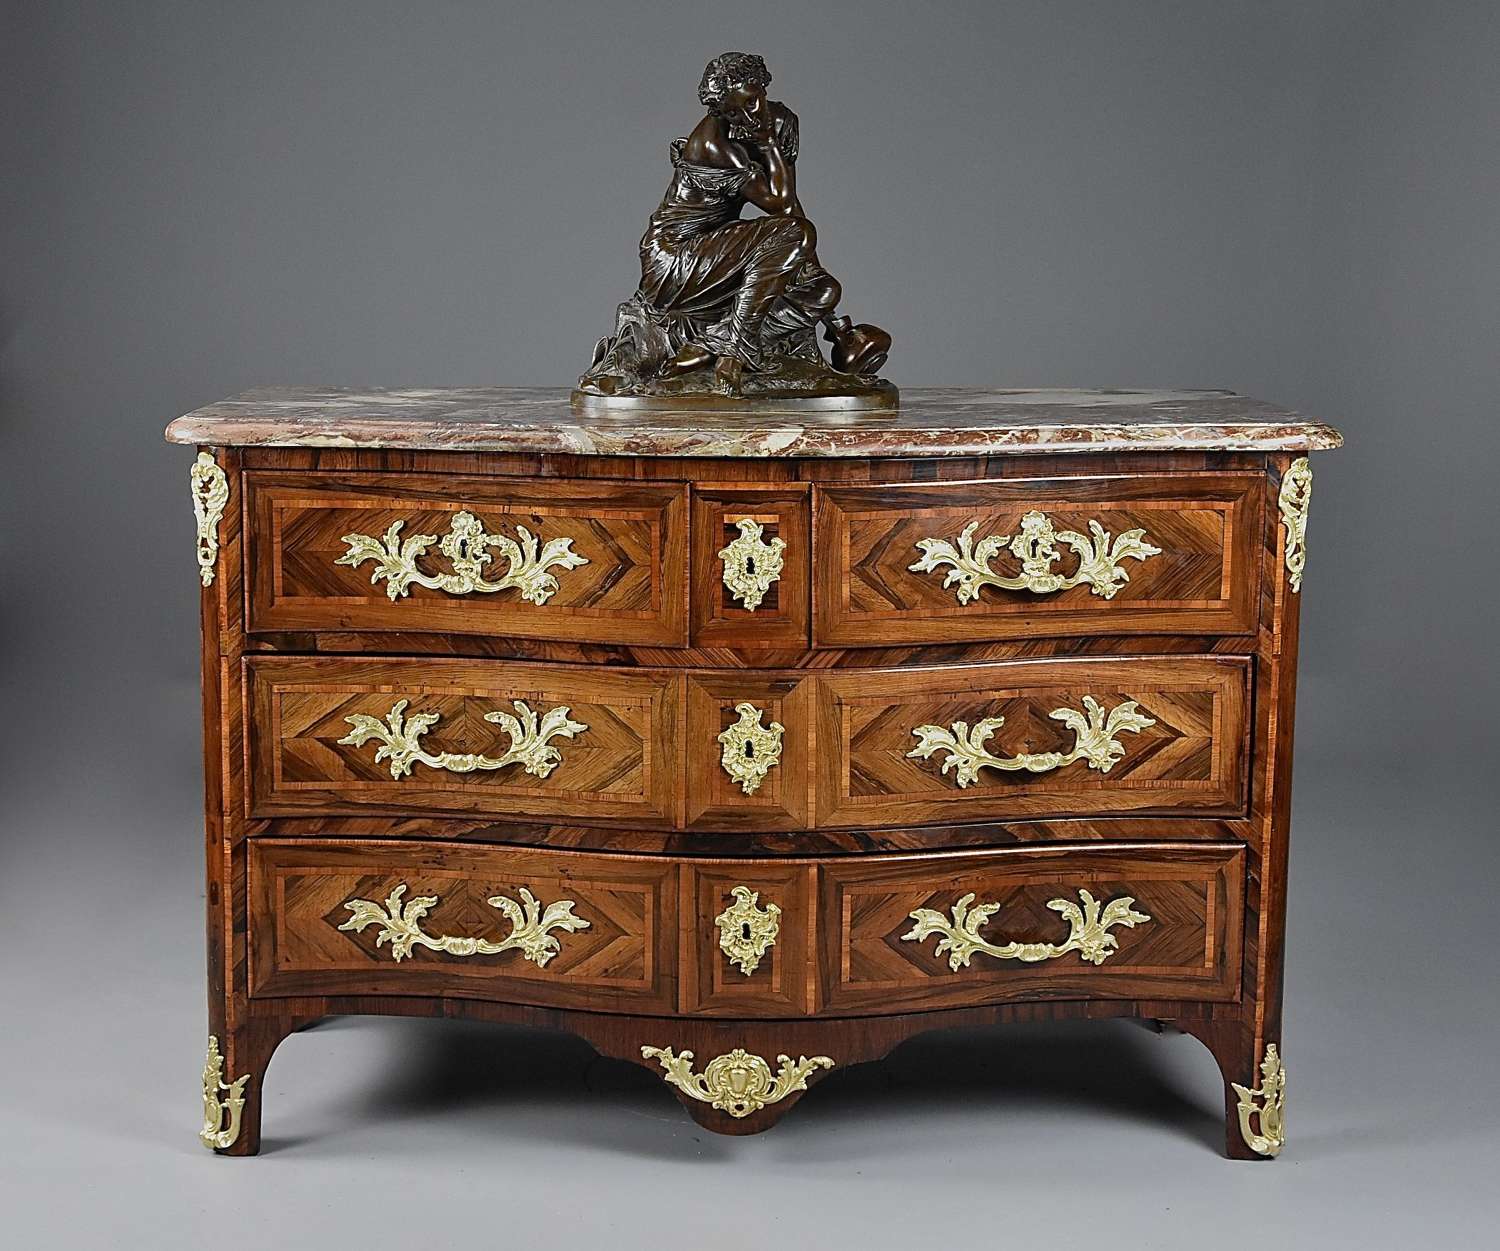 18thc French Régence rosewood serpentine commode with marble top